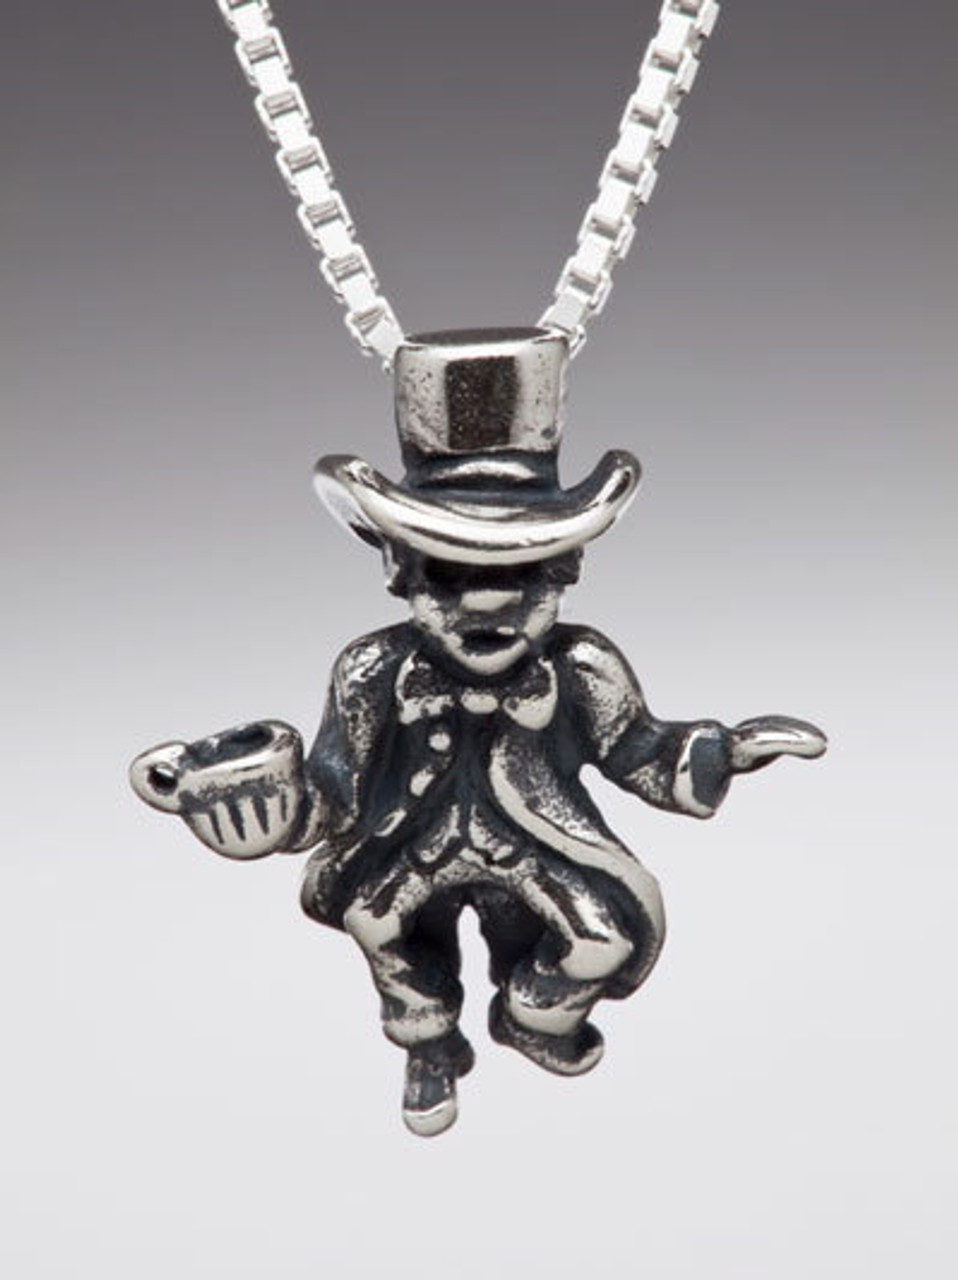 Alice in Wonderland Charm Collection - Silver